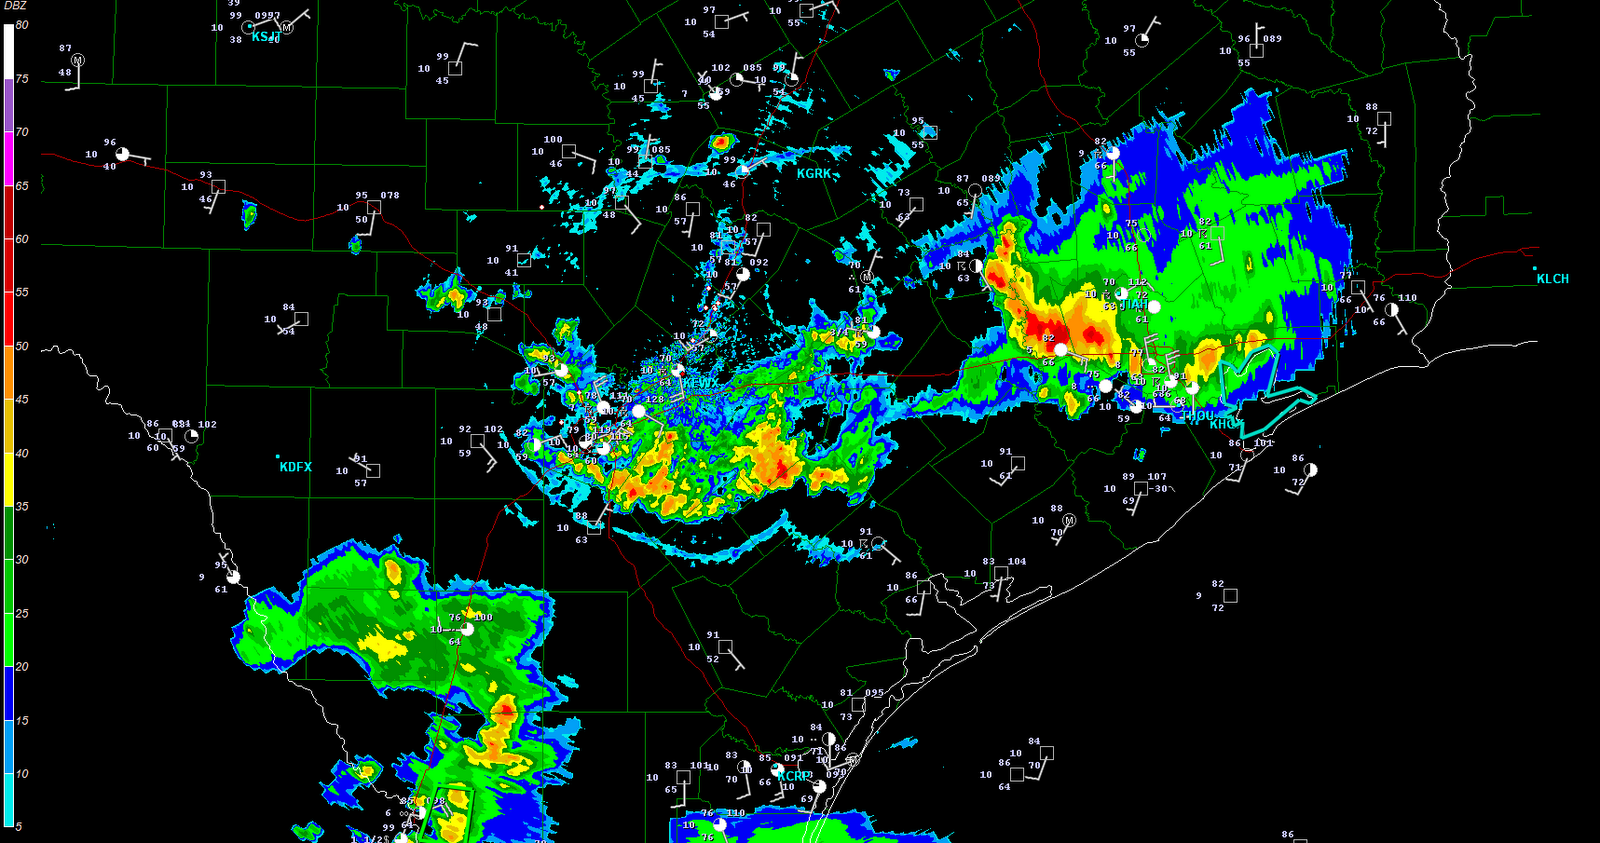 The Original Weather Blog: Cool Outflow Boundary Interactions Across Central Texas1600 x 843